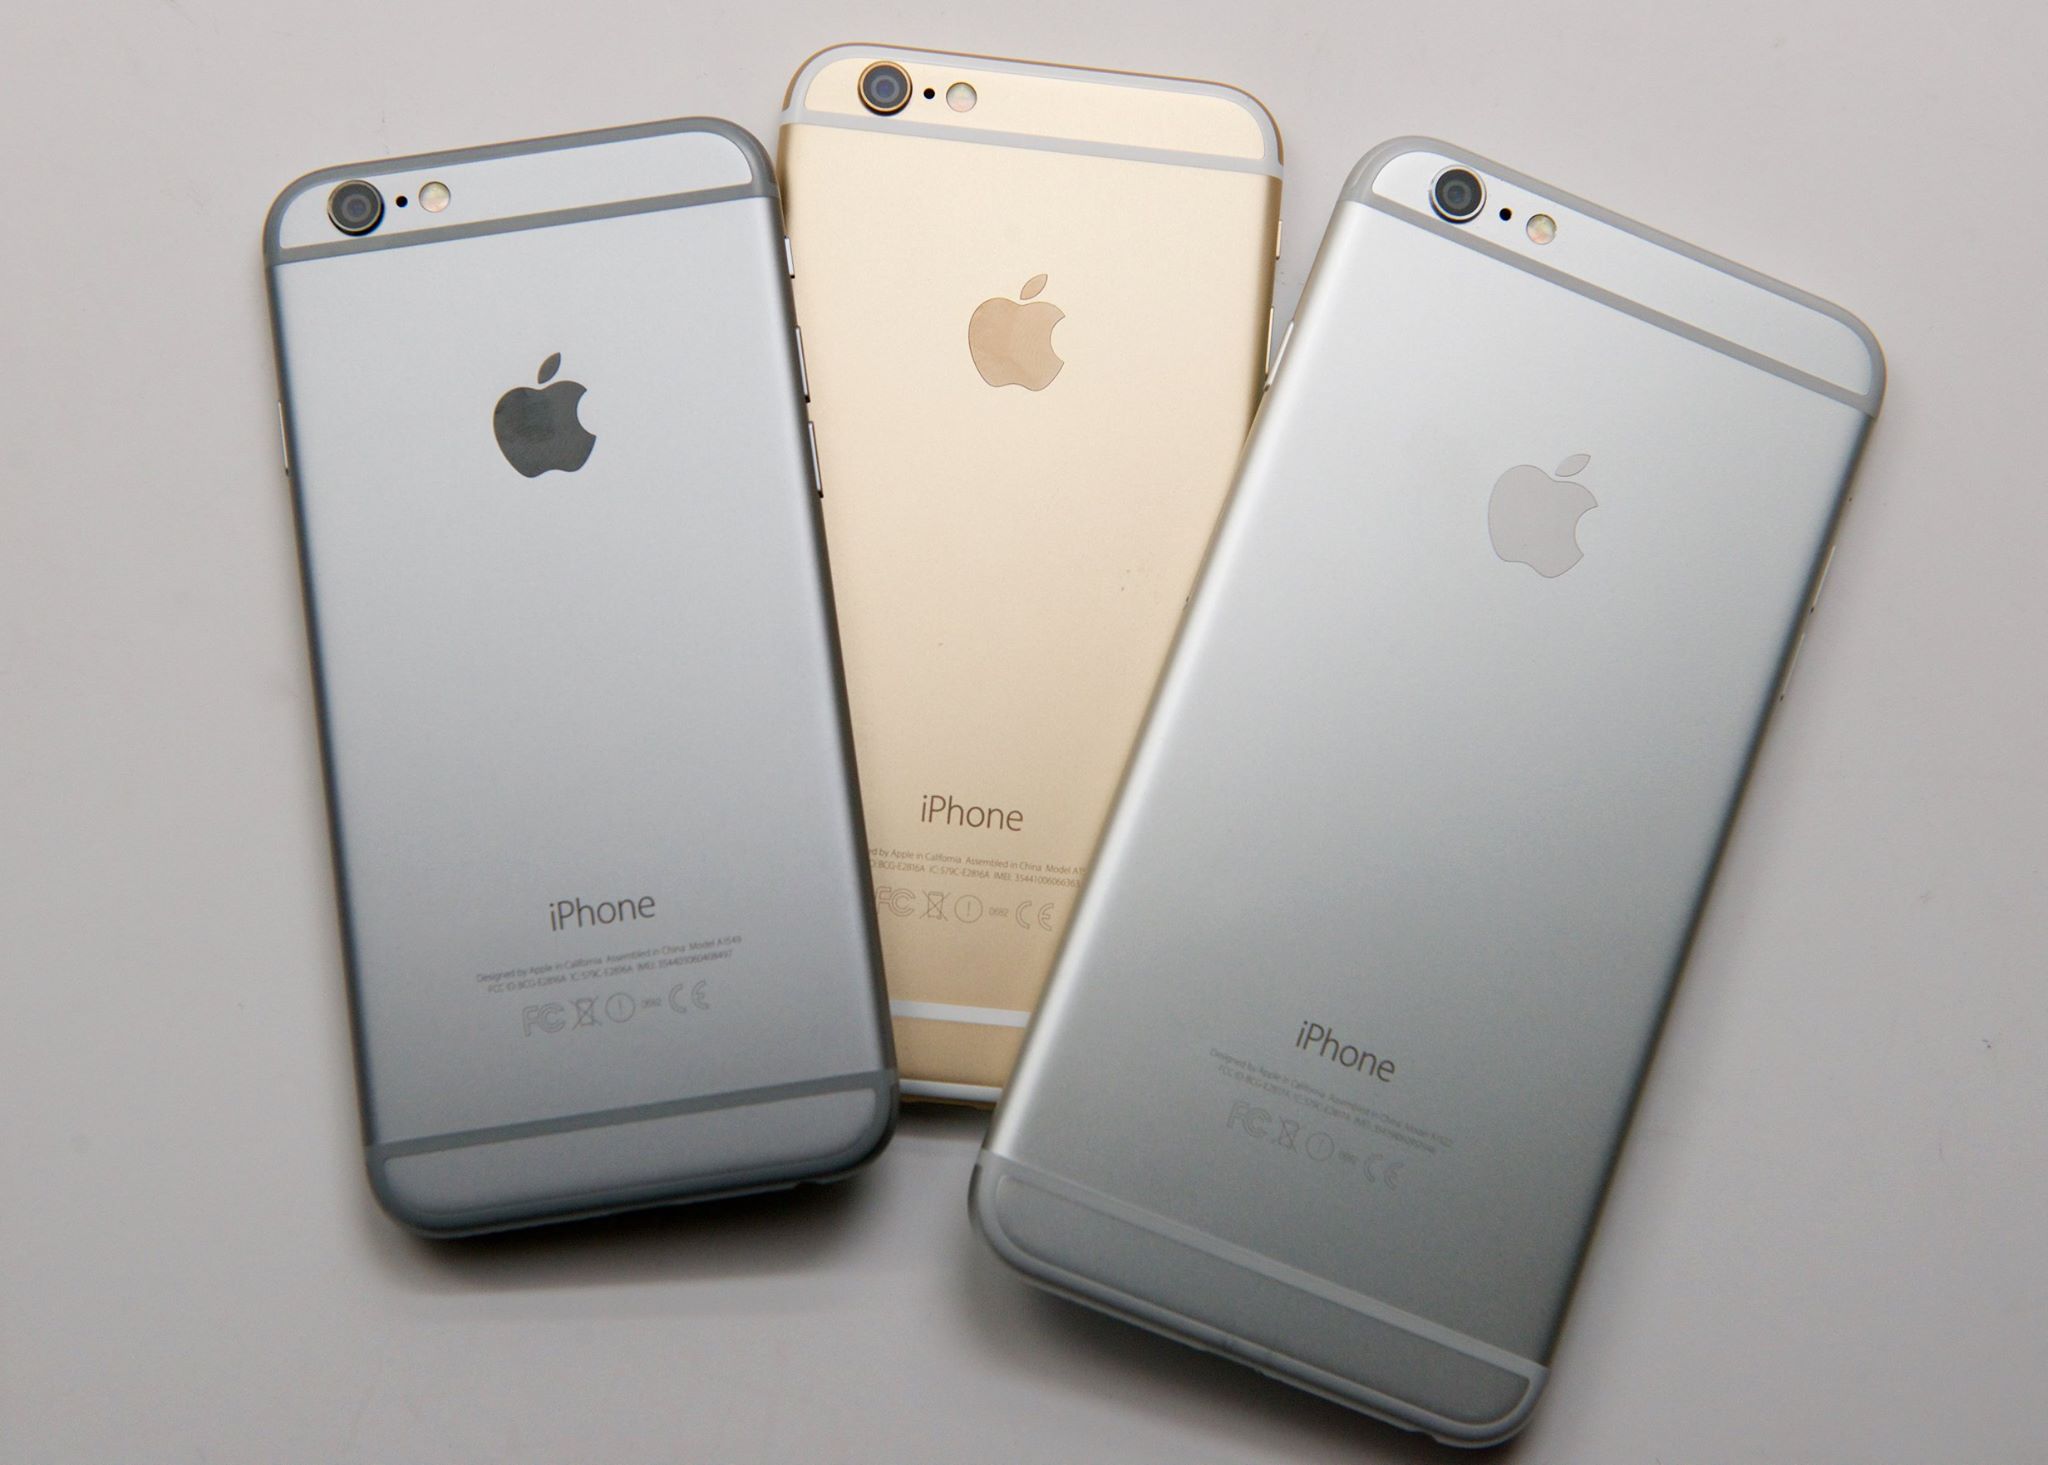 Don't expect major iPhone 6s design changes.